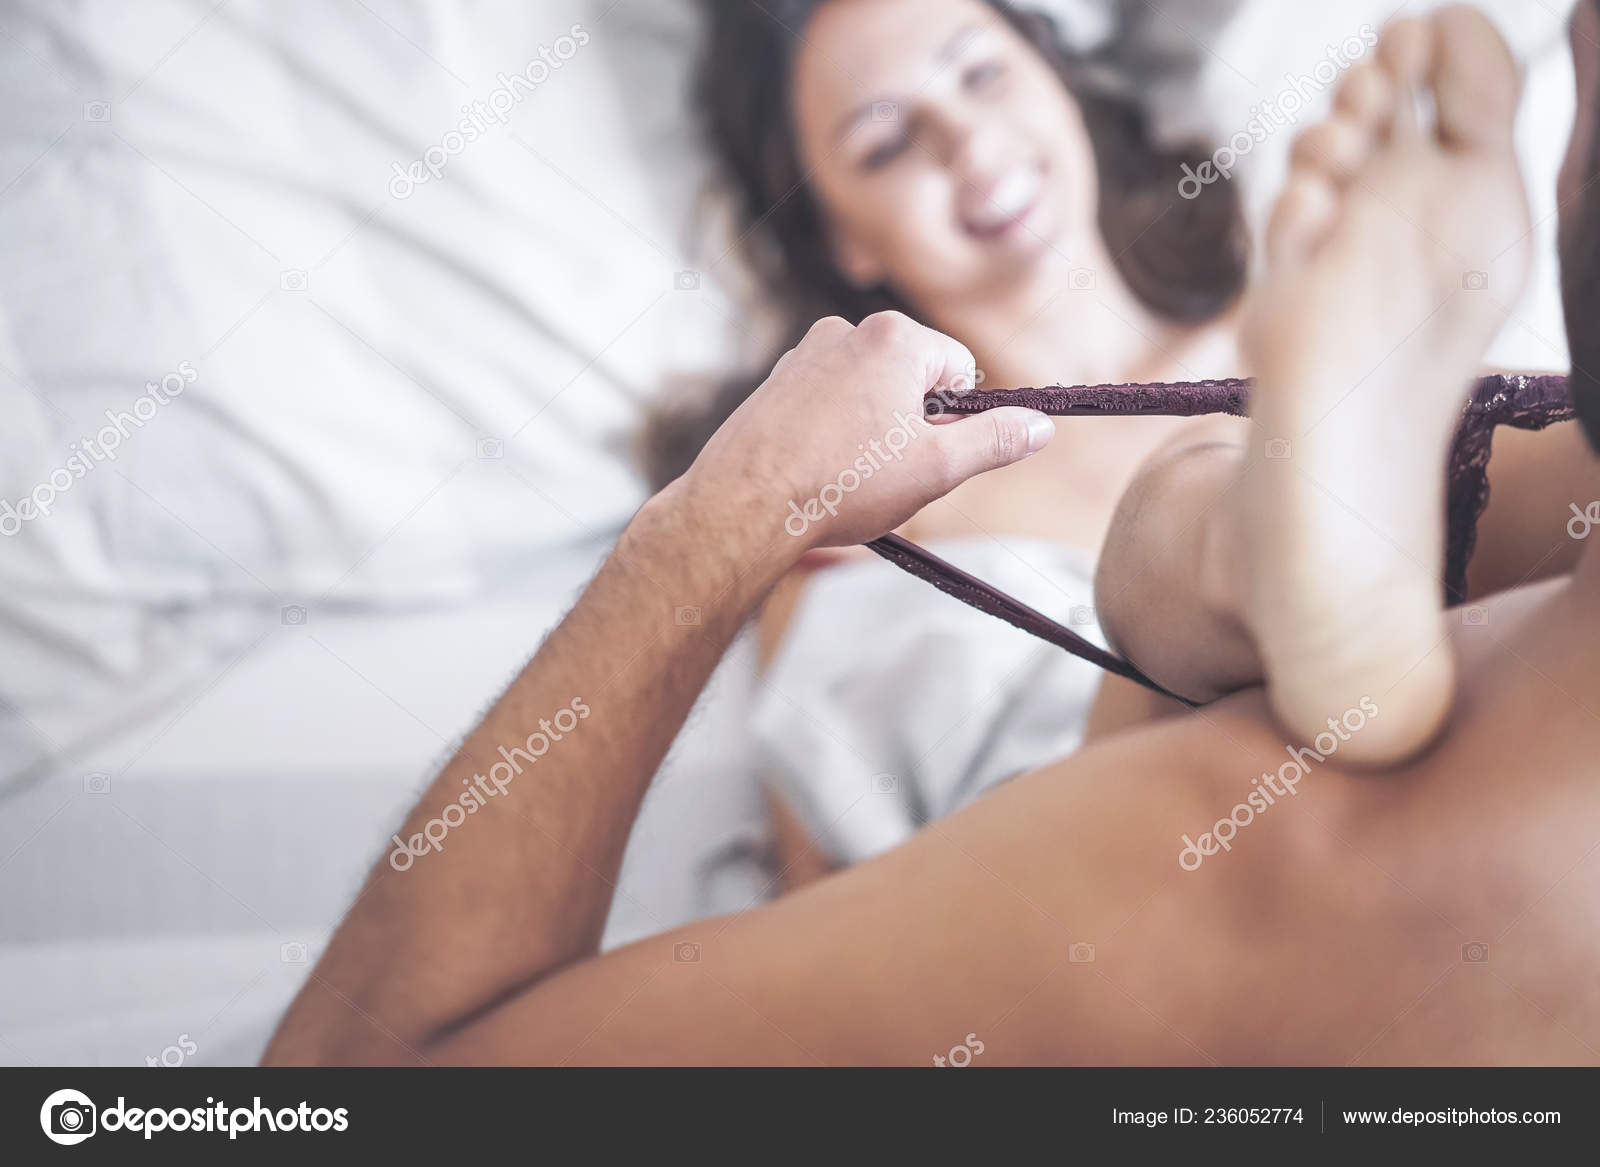 Boyfriend Putting His Girlfriends Panties Having Sex Bed Passionate Couple Stock Photo by ©AlessandroBiascioli 236052774 picture